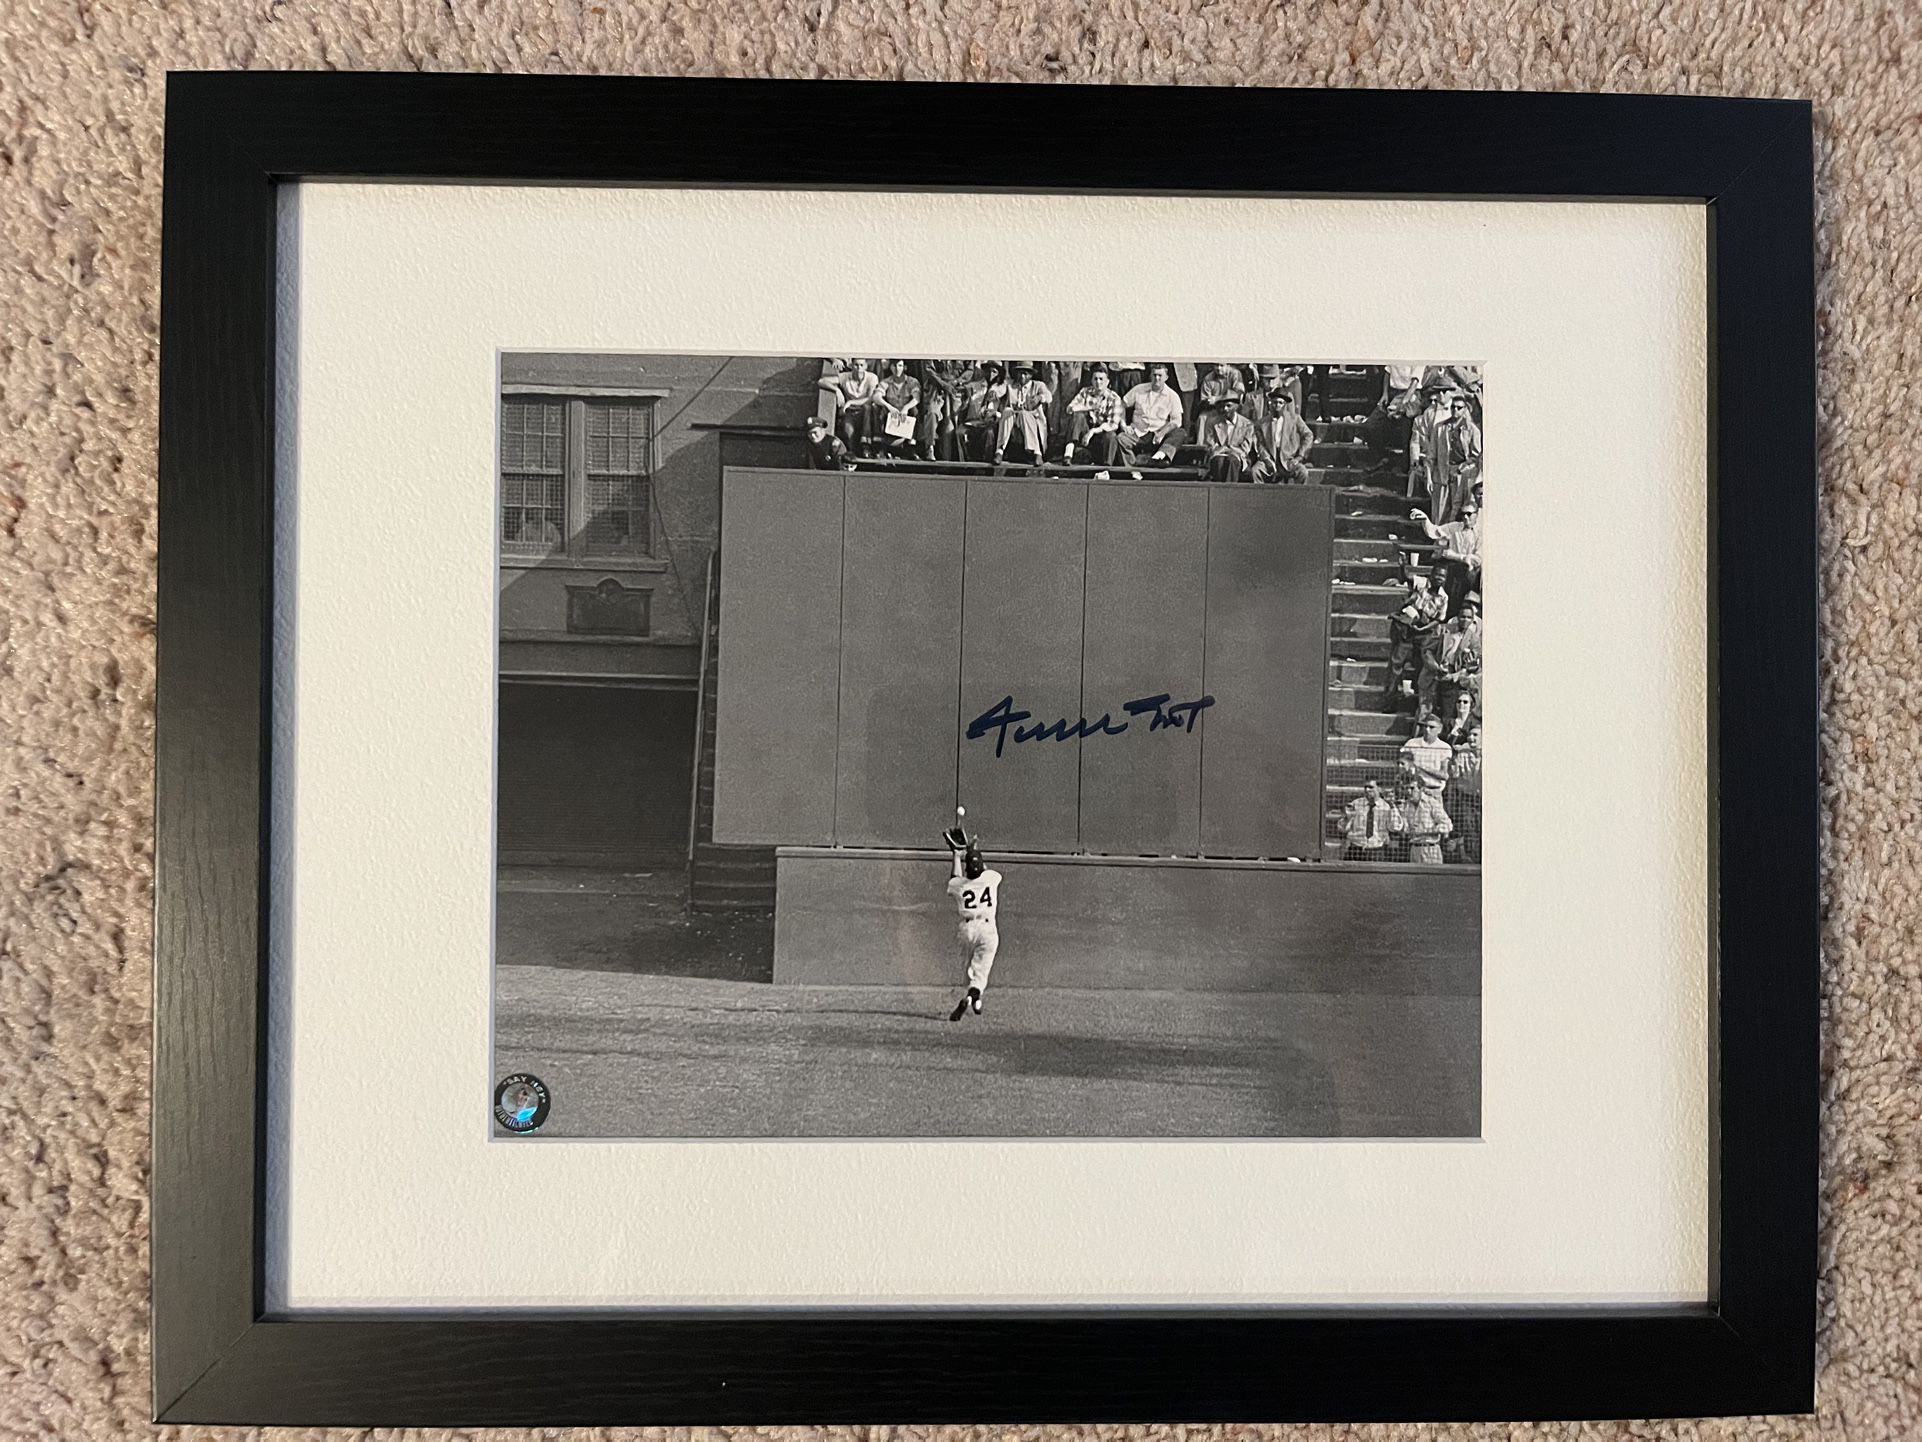 Willie Mays Signed Autographed 8x10 Photo Framed Authenticated!